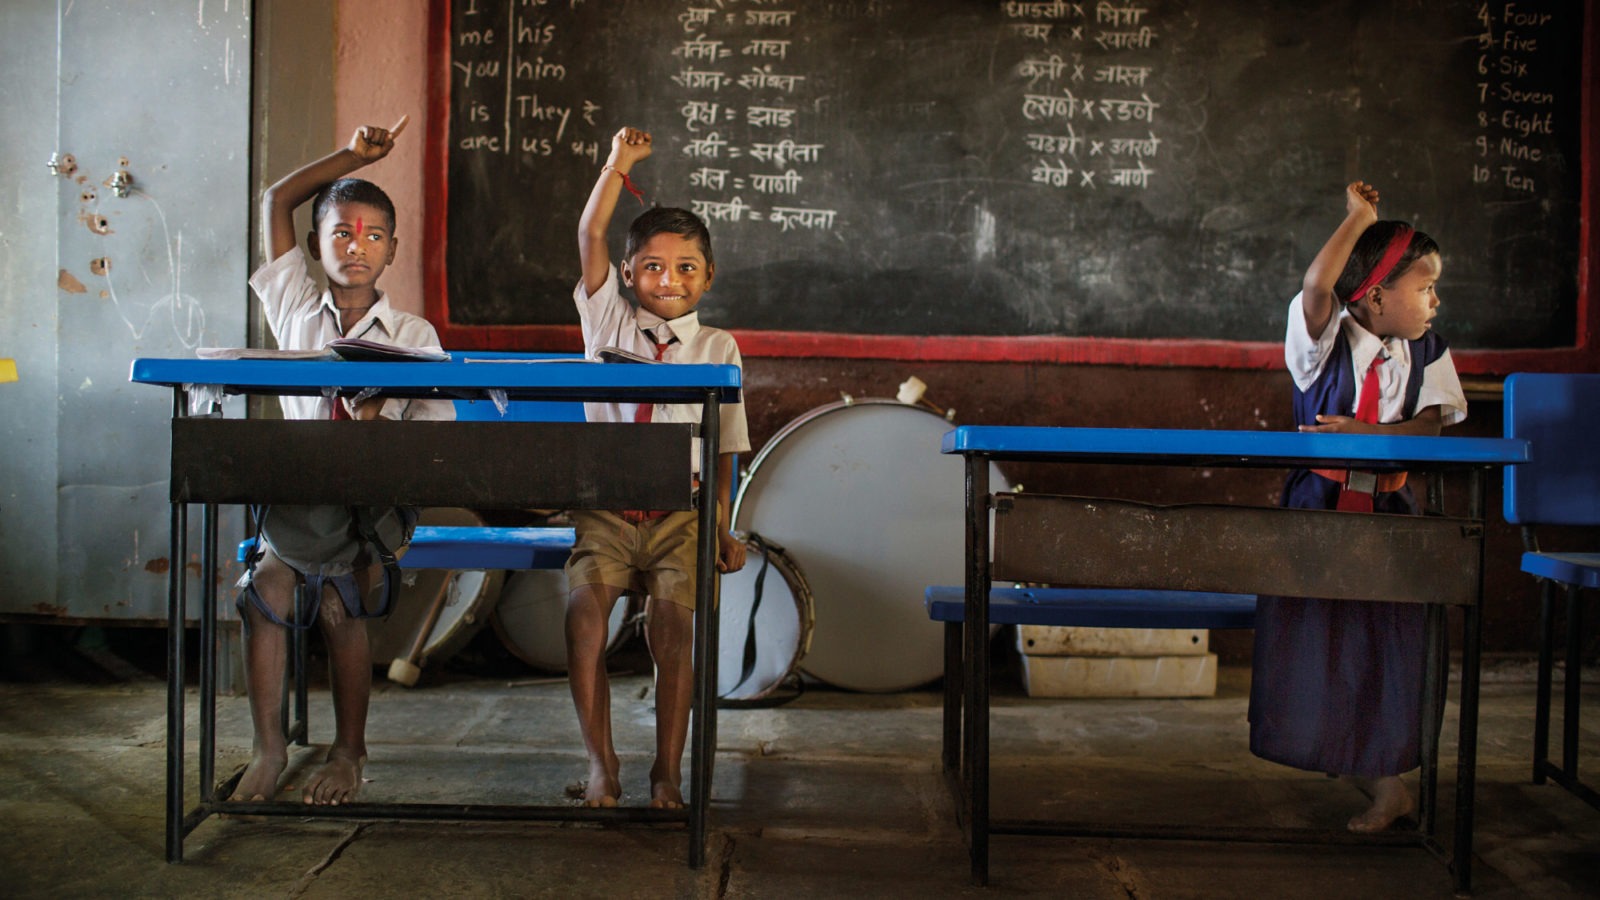 Two boys, one girl, all dressed in school uniforms sit with their hands raised in worn-down classroom. One boy smiles.